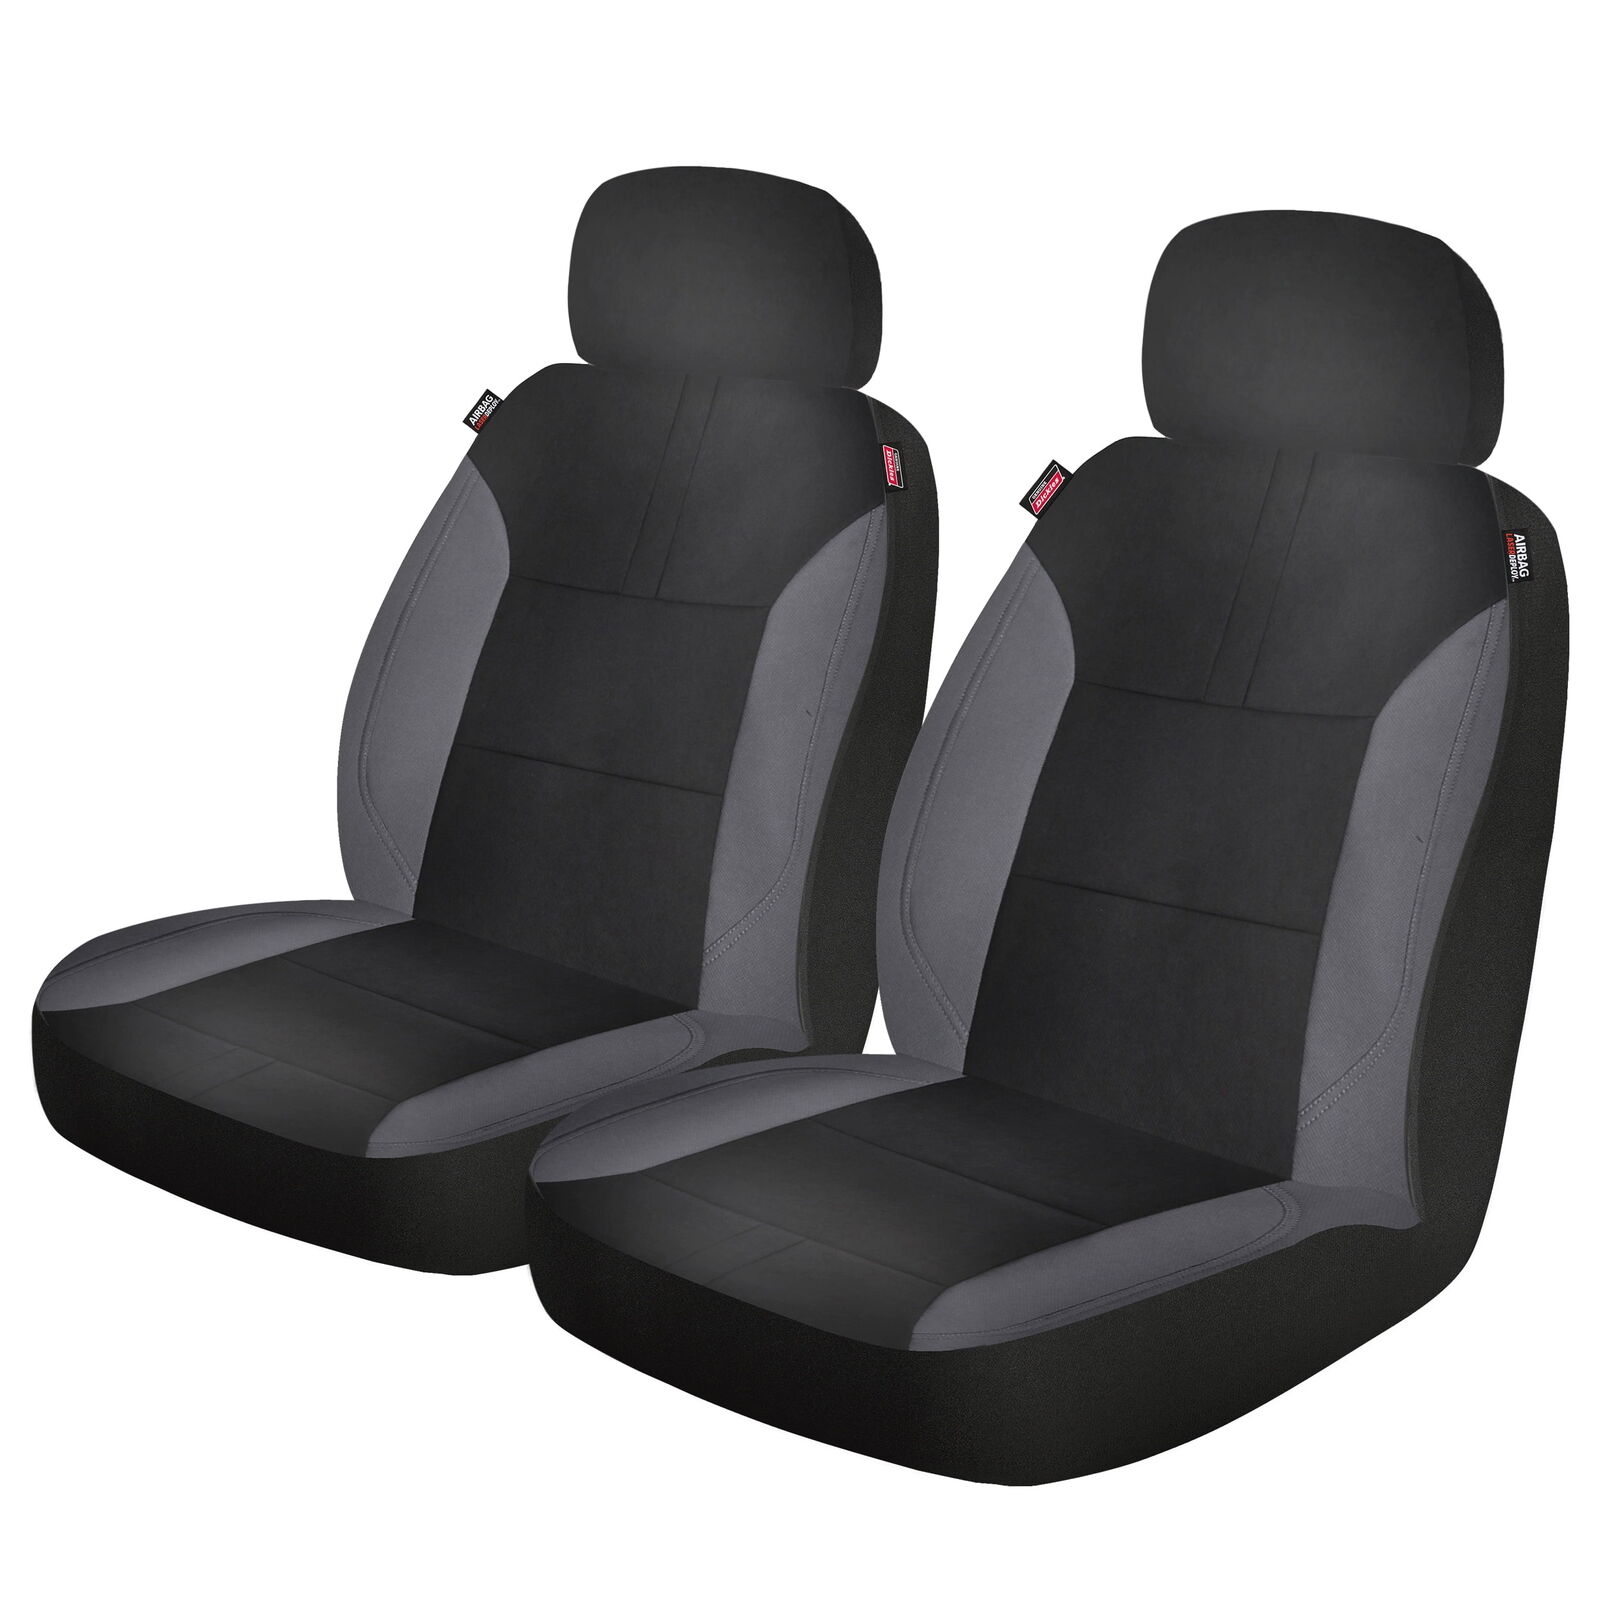 2 Piece Repreve Universal Front Car Seat Covers - Black and Gray